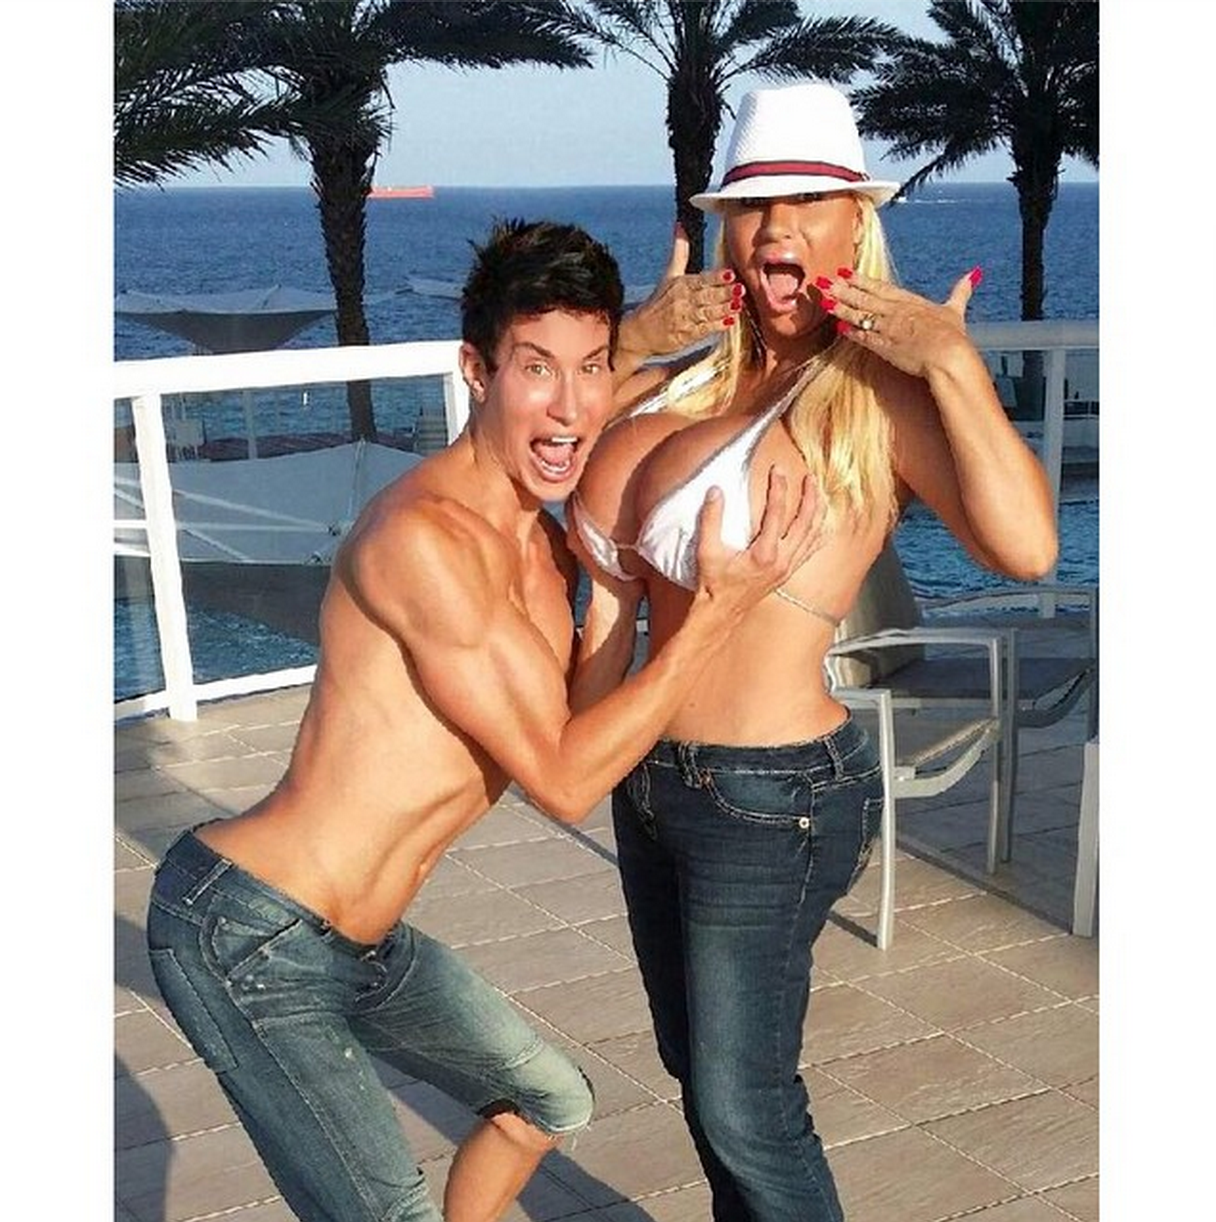 Lacey Willd Xvideo - Human Ken (A.K.A. Justin Jedlica) Has a Date With â€œExtreme Human Barbieâ€ Lacey  Wildd - In Touch Weekly